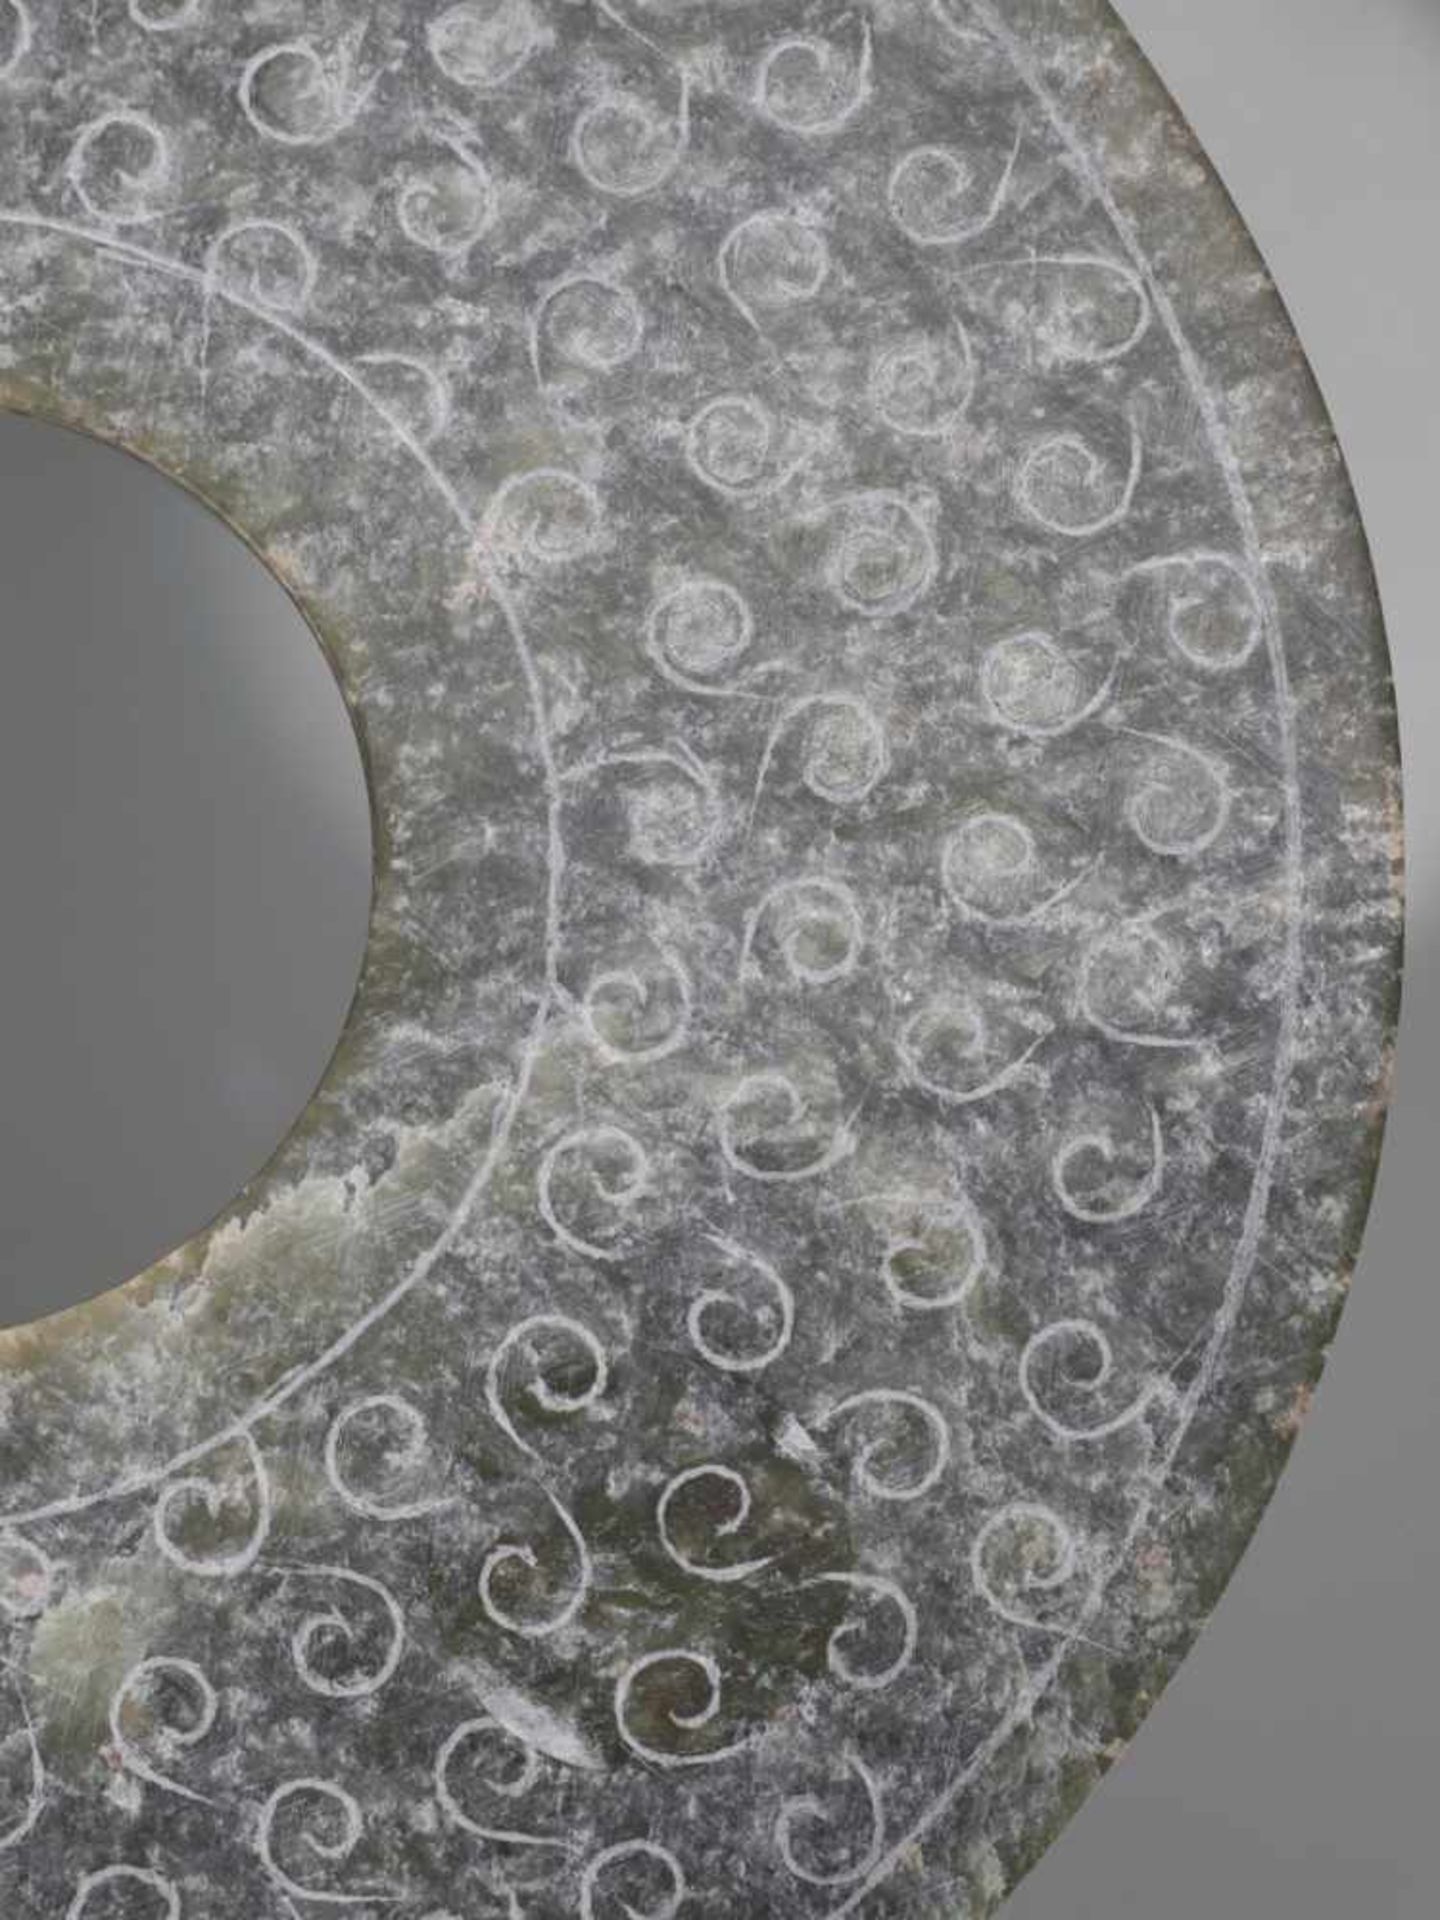 A REFINED CHARCOAL GREY DISC WITH ENGRAVED CURLS Jade. China, Han Dynasty, 2nd century BC 穀紋玉璧 - 漢代, - Image 5 of 8